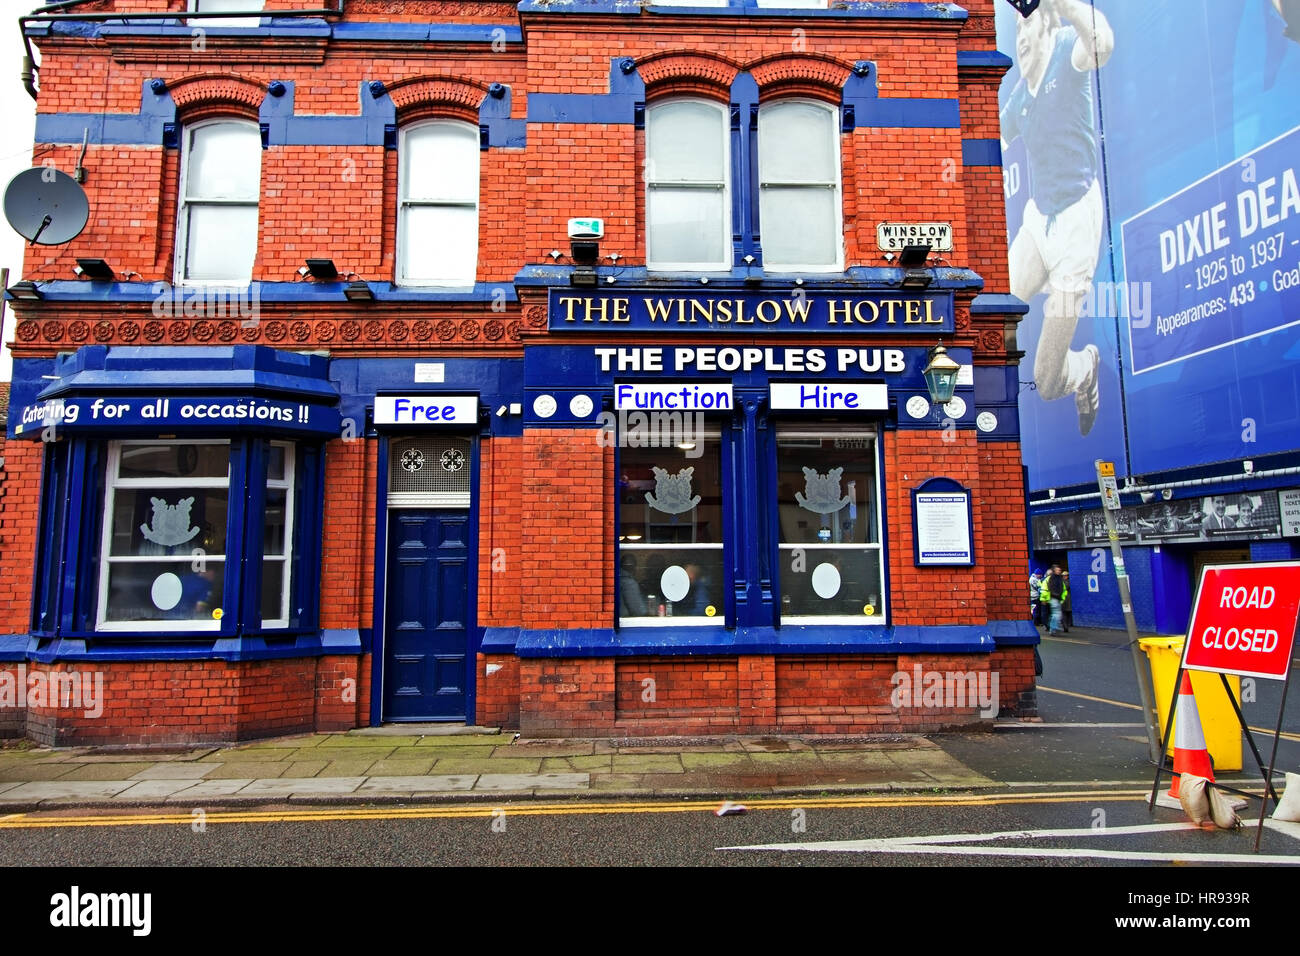 The Winslow Hotel 'The Peoples Pub' situated right next to Everton Football Club's Goodison Park Stadium Stock Photo